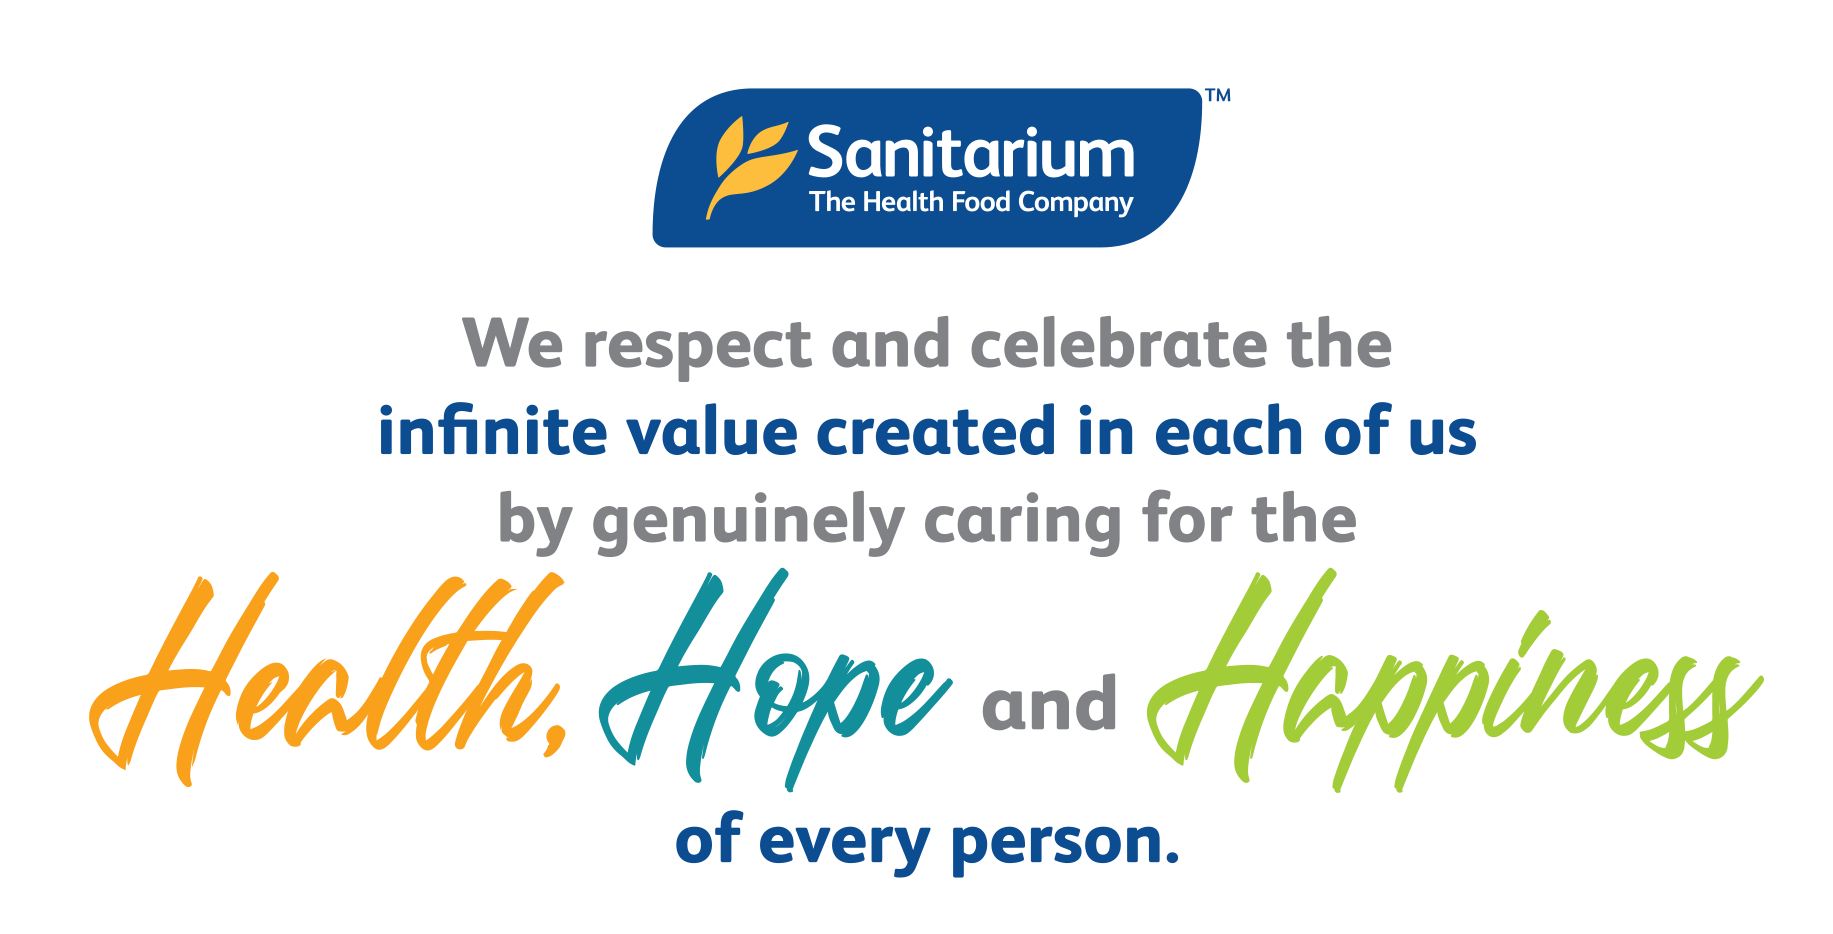 We respect and celebrate the infinite value created in each of us, by genuinely caring for the health, hope and happiness of every person.